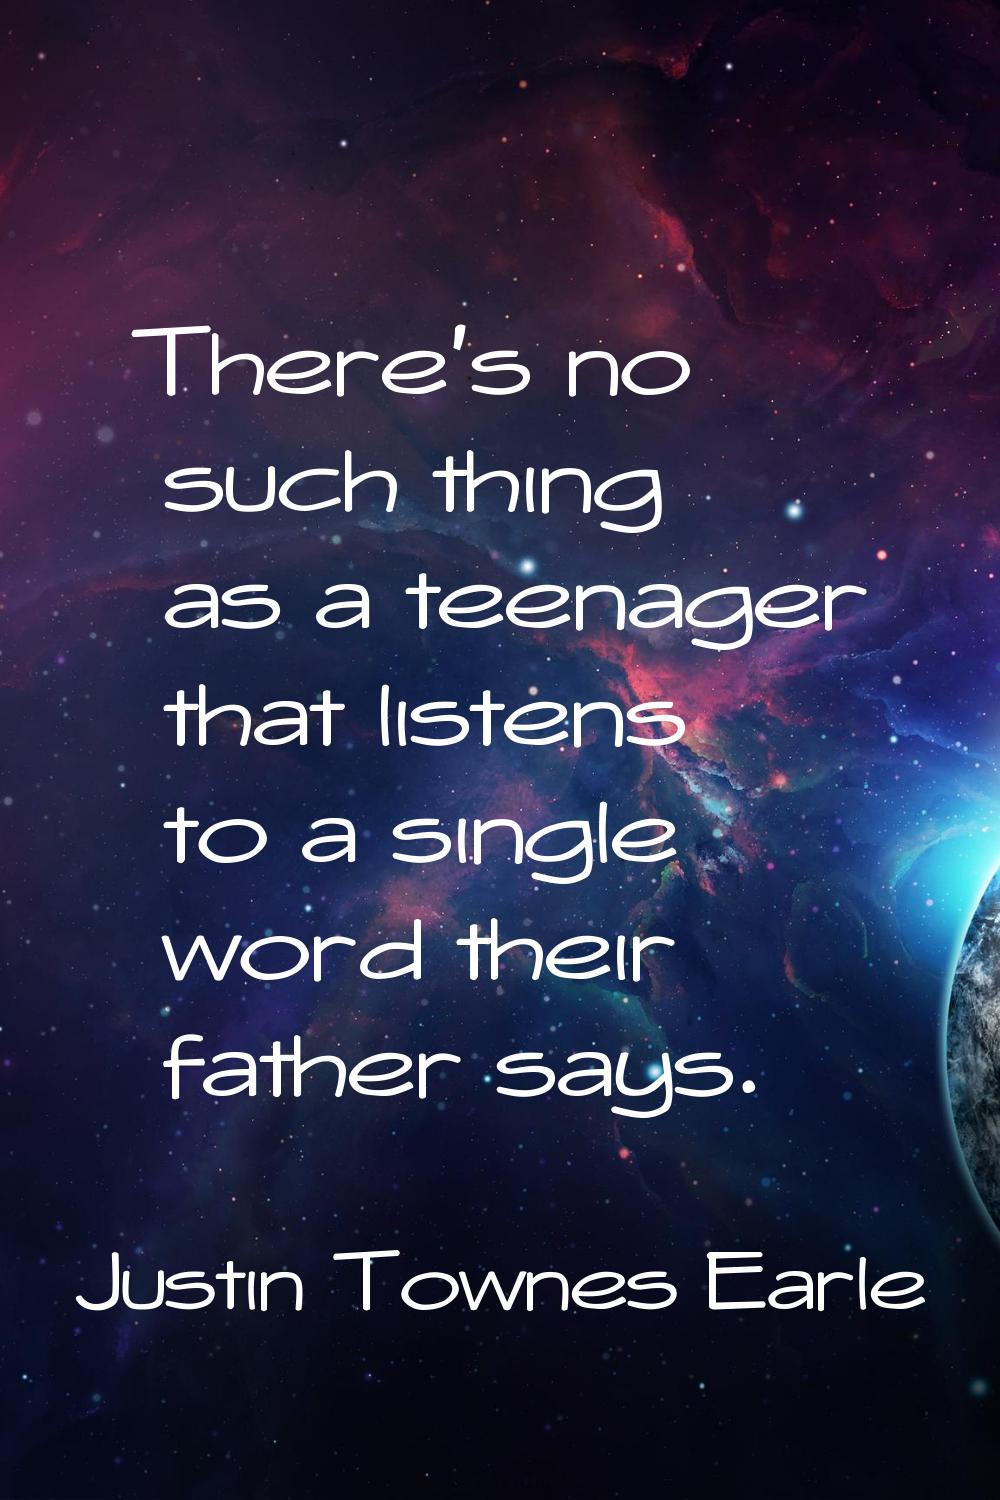 There's no such thing as a teenager that listens to a single word their father says.